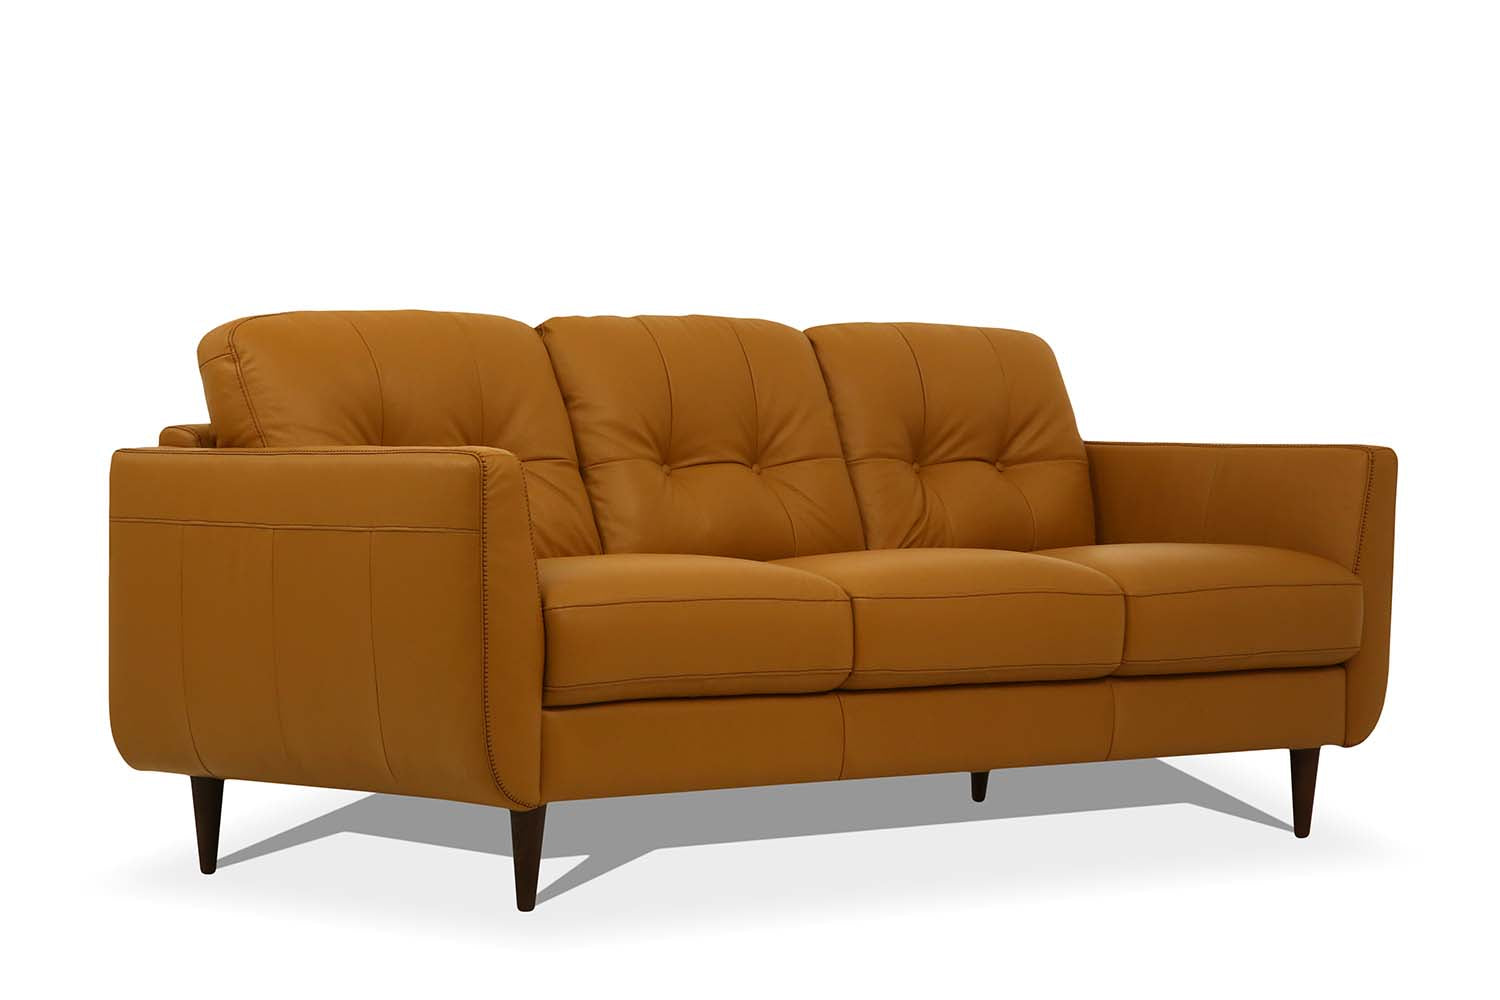 ACME Furniture Sofas & Couches - Sofa, Camel Leather 54955